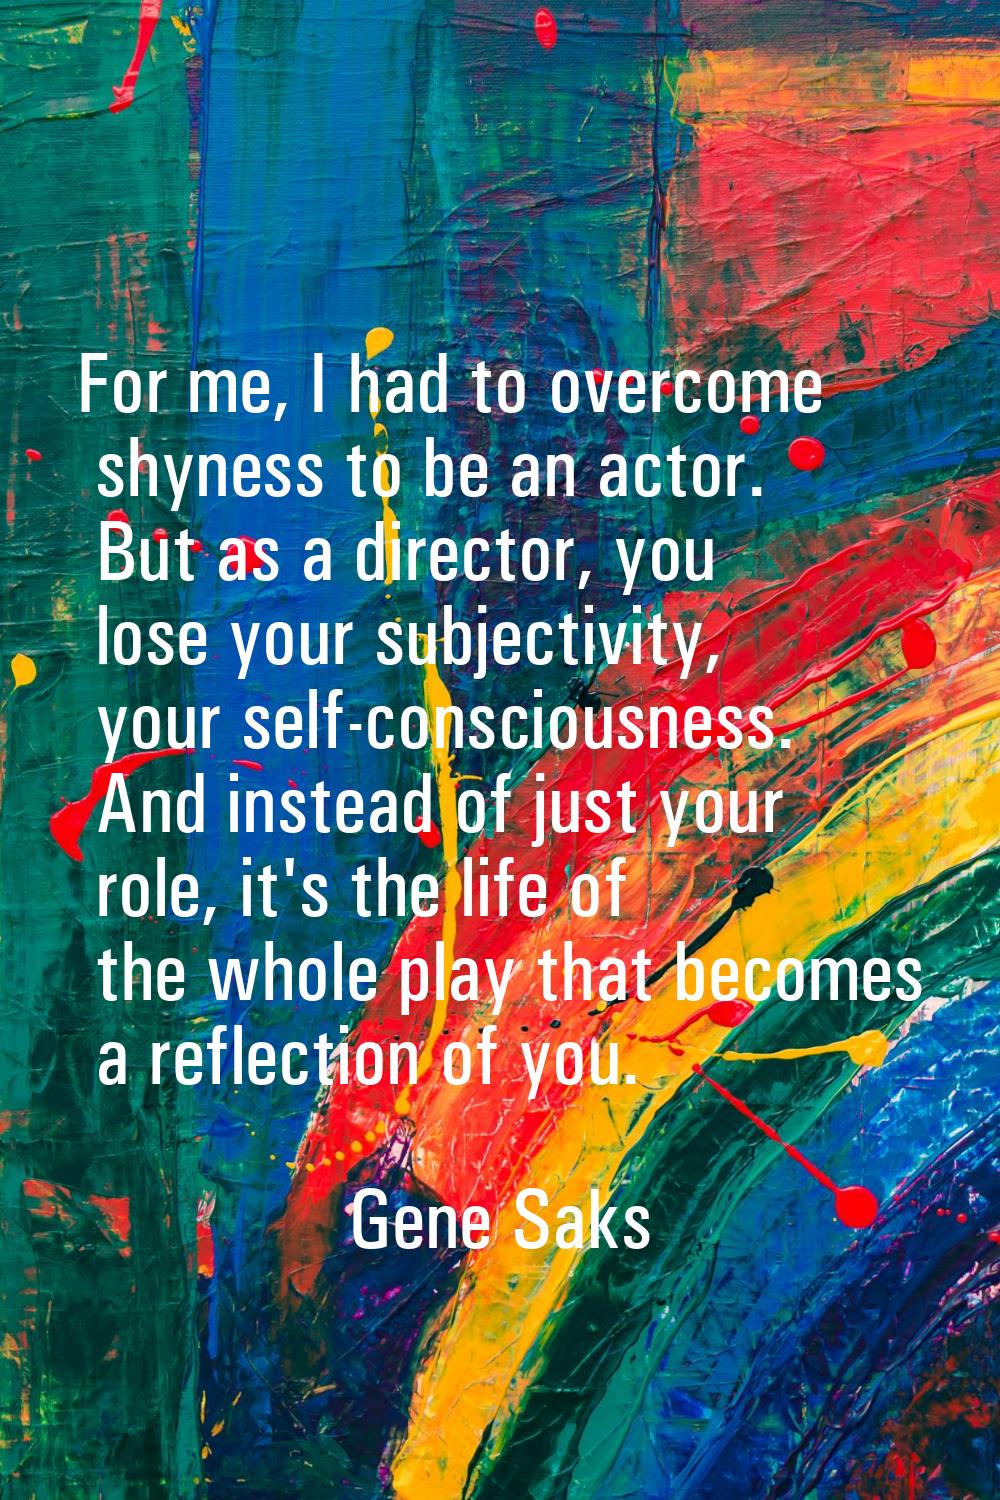 For me, I had to overcome shyness to be an actor. But as a director, you lose your subjectivity, yo